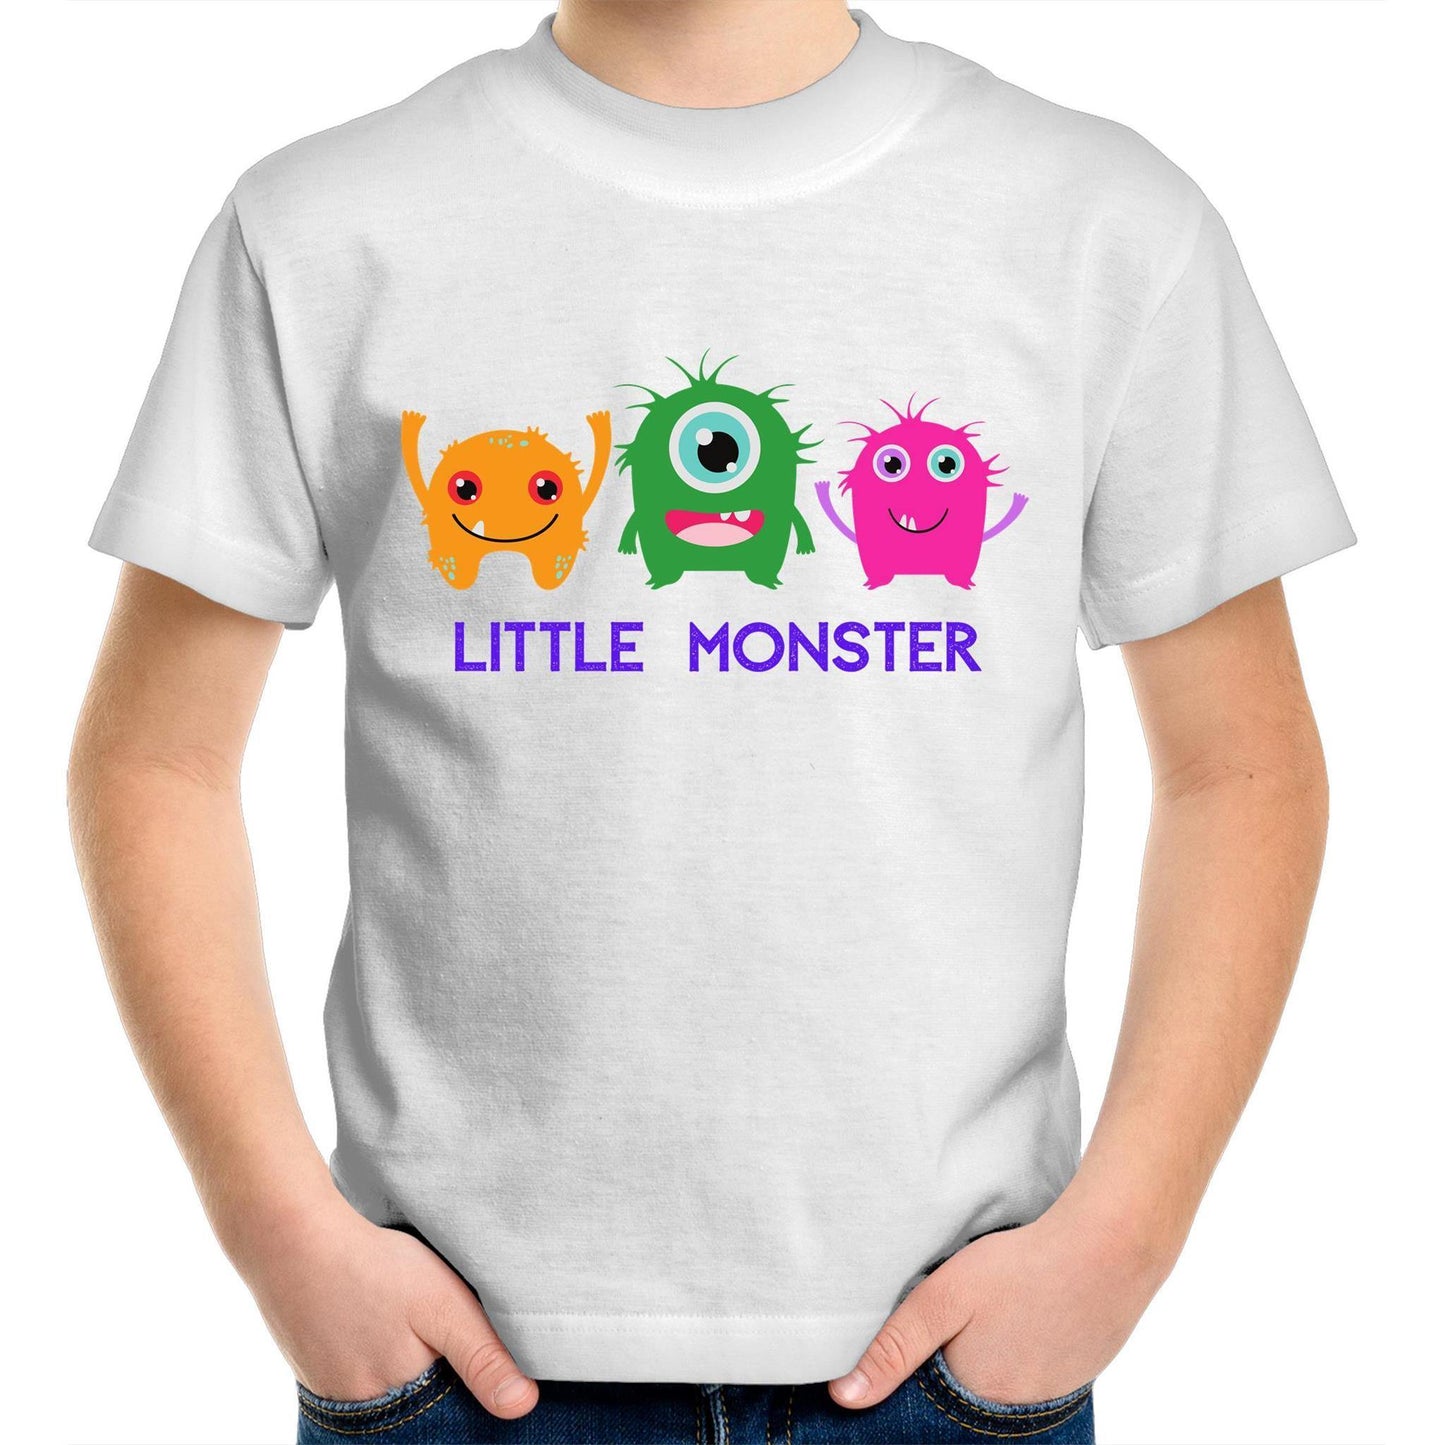 Little Monster - Kids Youth Crew T-Shirt White Kids Youth T-shirt Funny Sci Fi